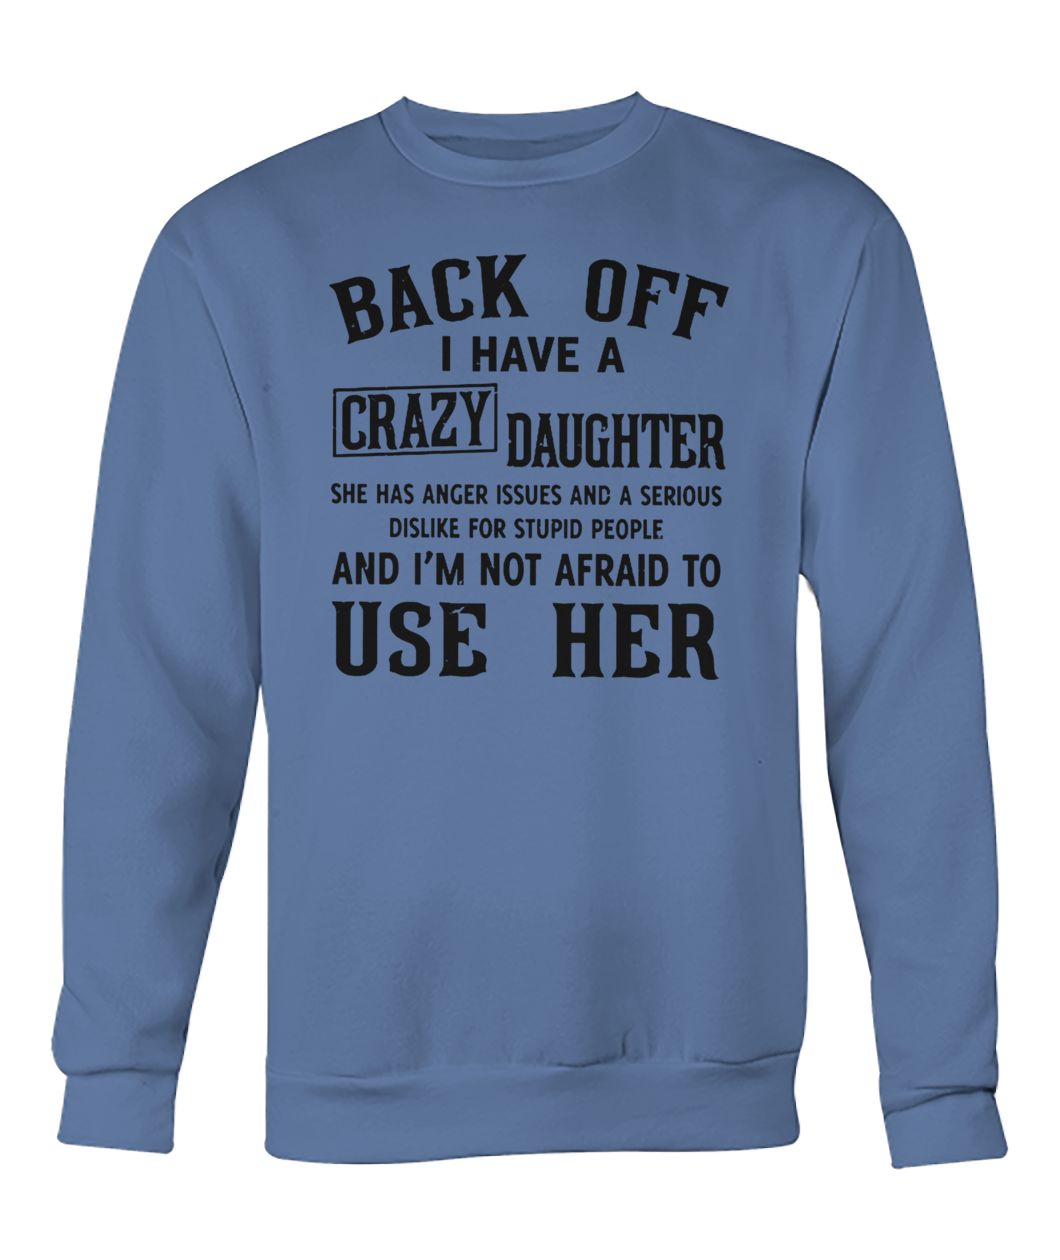 Back off I have a crazy daughter she has anger issues and a serious dislike for stupid people crew neck sweatshirt